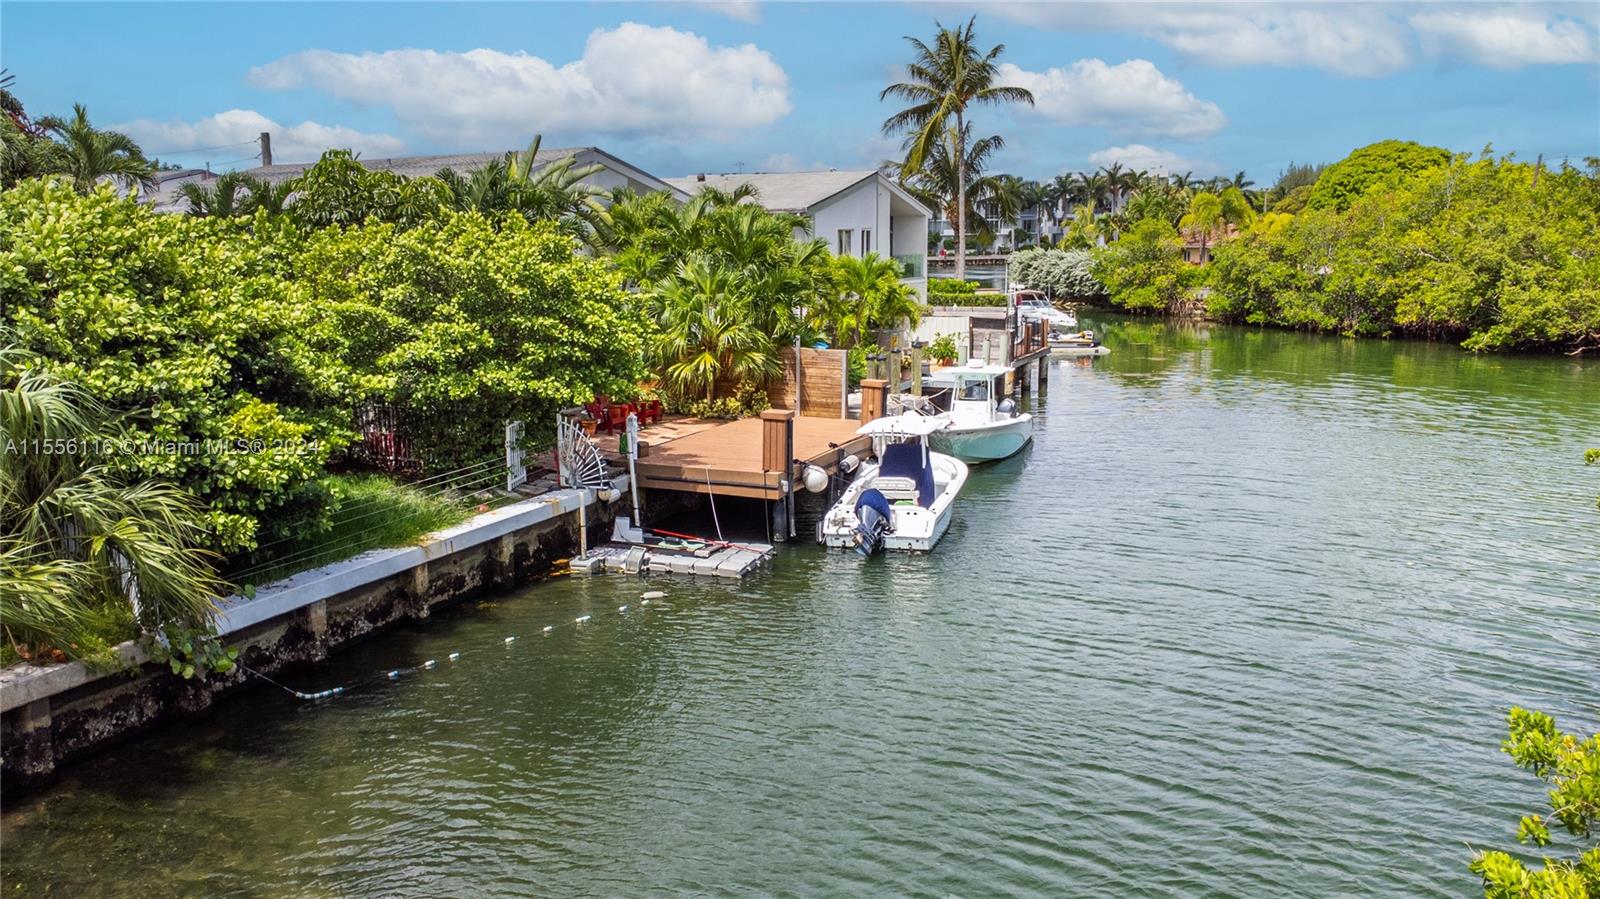 RARE FIND ON MIAMI BEACH:  Waterfront home with two boat slips and a large private yard just walking distance to the beach. Open bay access and no fixed bridges.  This does not exist anywhere else on the beach. True boater’s paradise. Neighboring waterfront lot included in sale-over 80 feet of available seawall & 2 boat slips! This spectacular updated 3 bed, 2 & 1/2 bath waterfront townhome with no HOA fee is being offered w/a 30 ft. dock w/boat slip, kayak launch, & has open bay access w/no fixed bridges. Featuring incredible views w/unmatched privacy & serenity. The sophisticated interior design w/large format porcelain floors downstairs & bamboo upstairs, open designer kitchen, & separate laundry room. Ideally situated walking distance to beach, restaurants, shops, houses of worship...